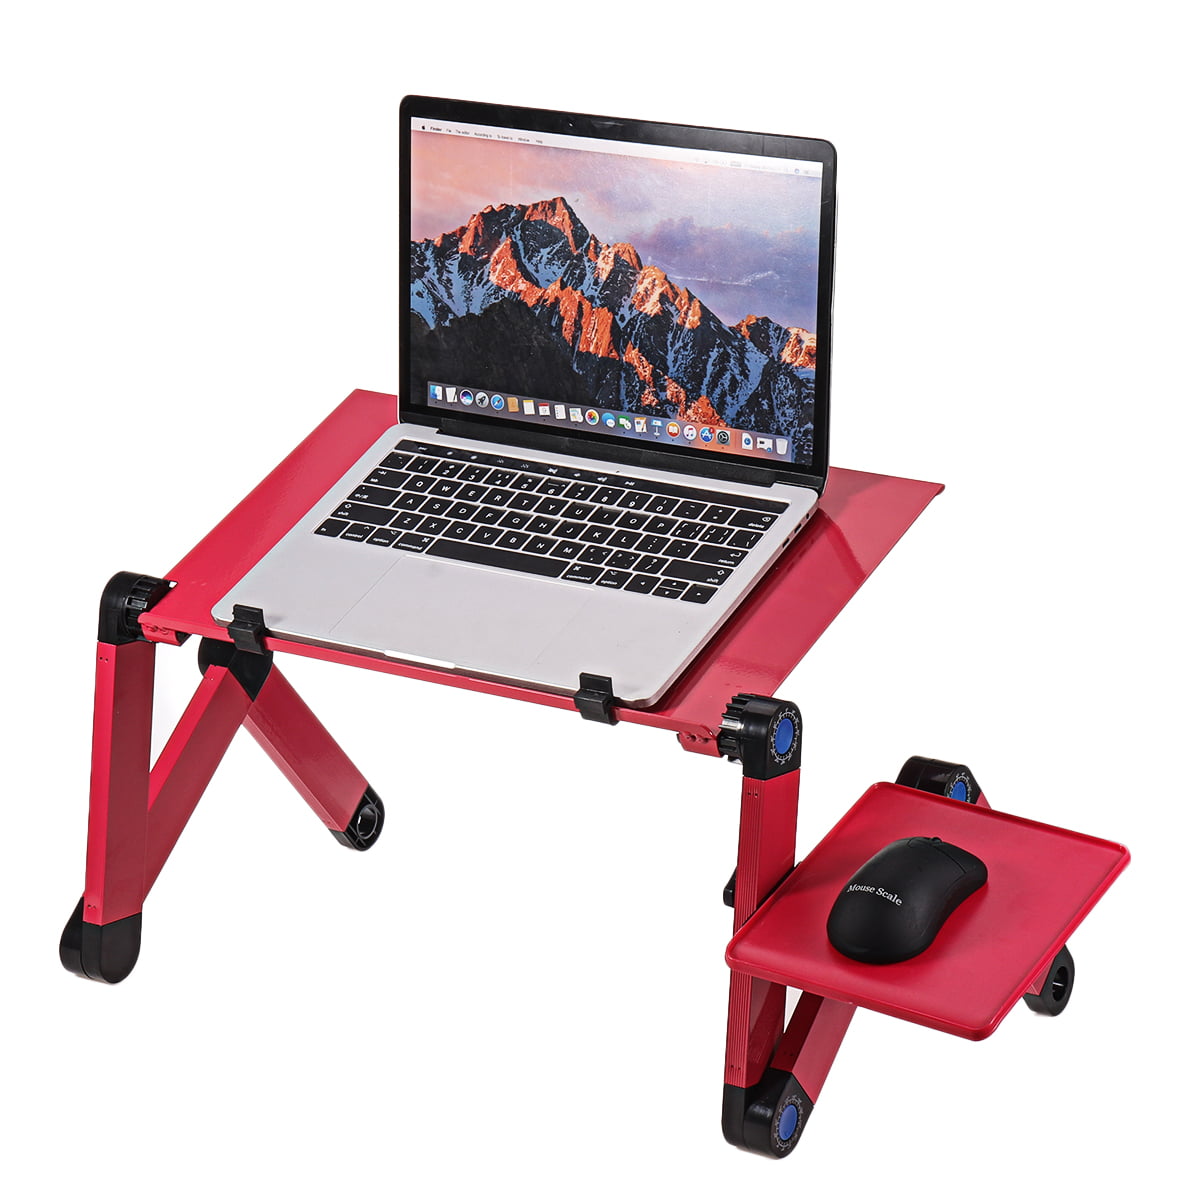 48cm Laptop Table Stand,Portable Laptop Stand for Desk & Bed Adjustable Riser Lap Tray Stand-Up Computer Lapdesks with Mouse Pad Side Compatible MacBook,Notebook & Tablets for Size up to 17 